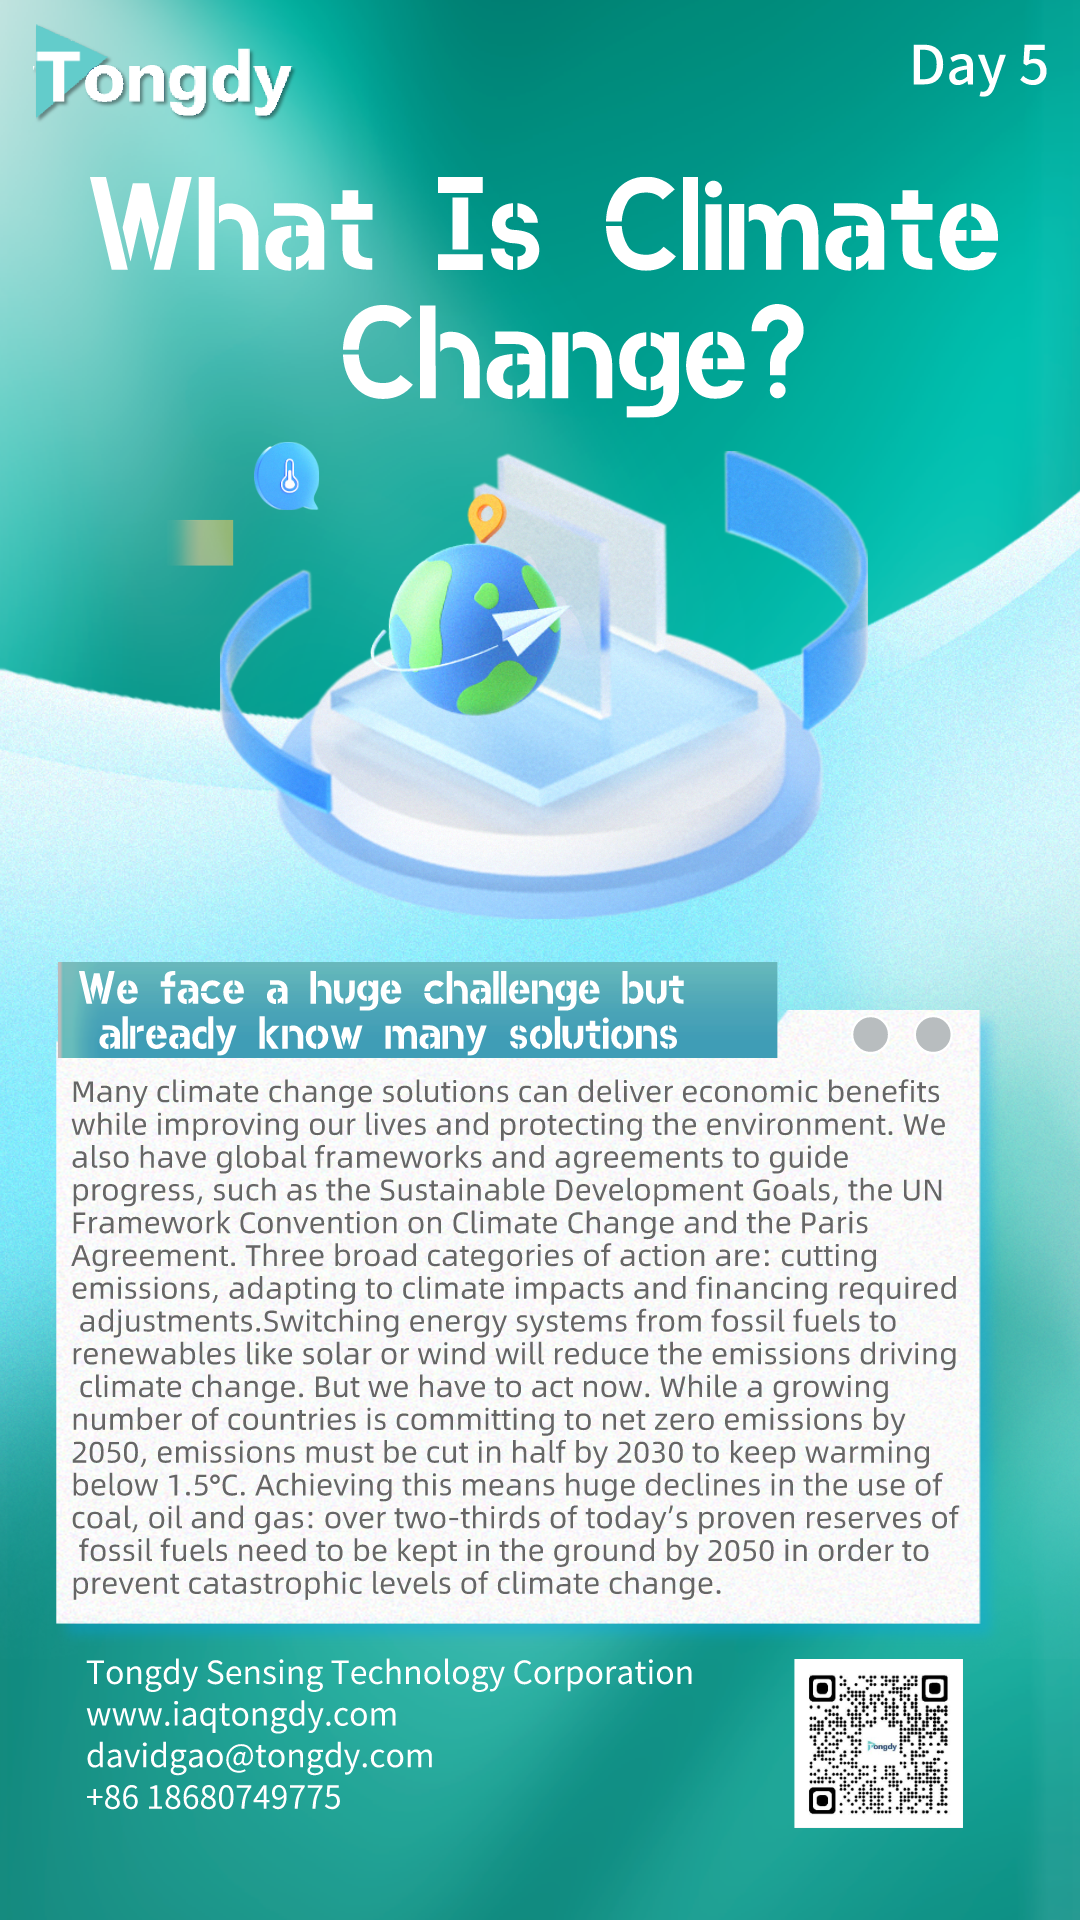 Day 5 What Is Climate Change?